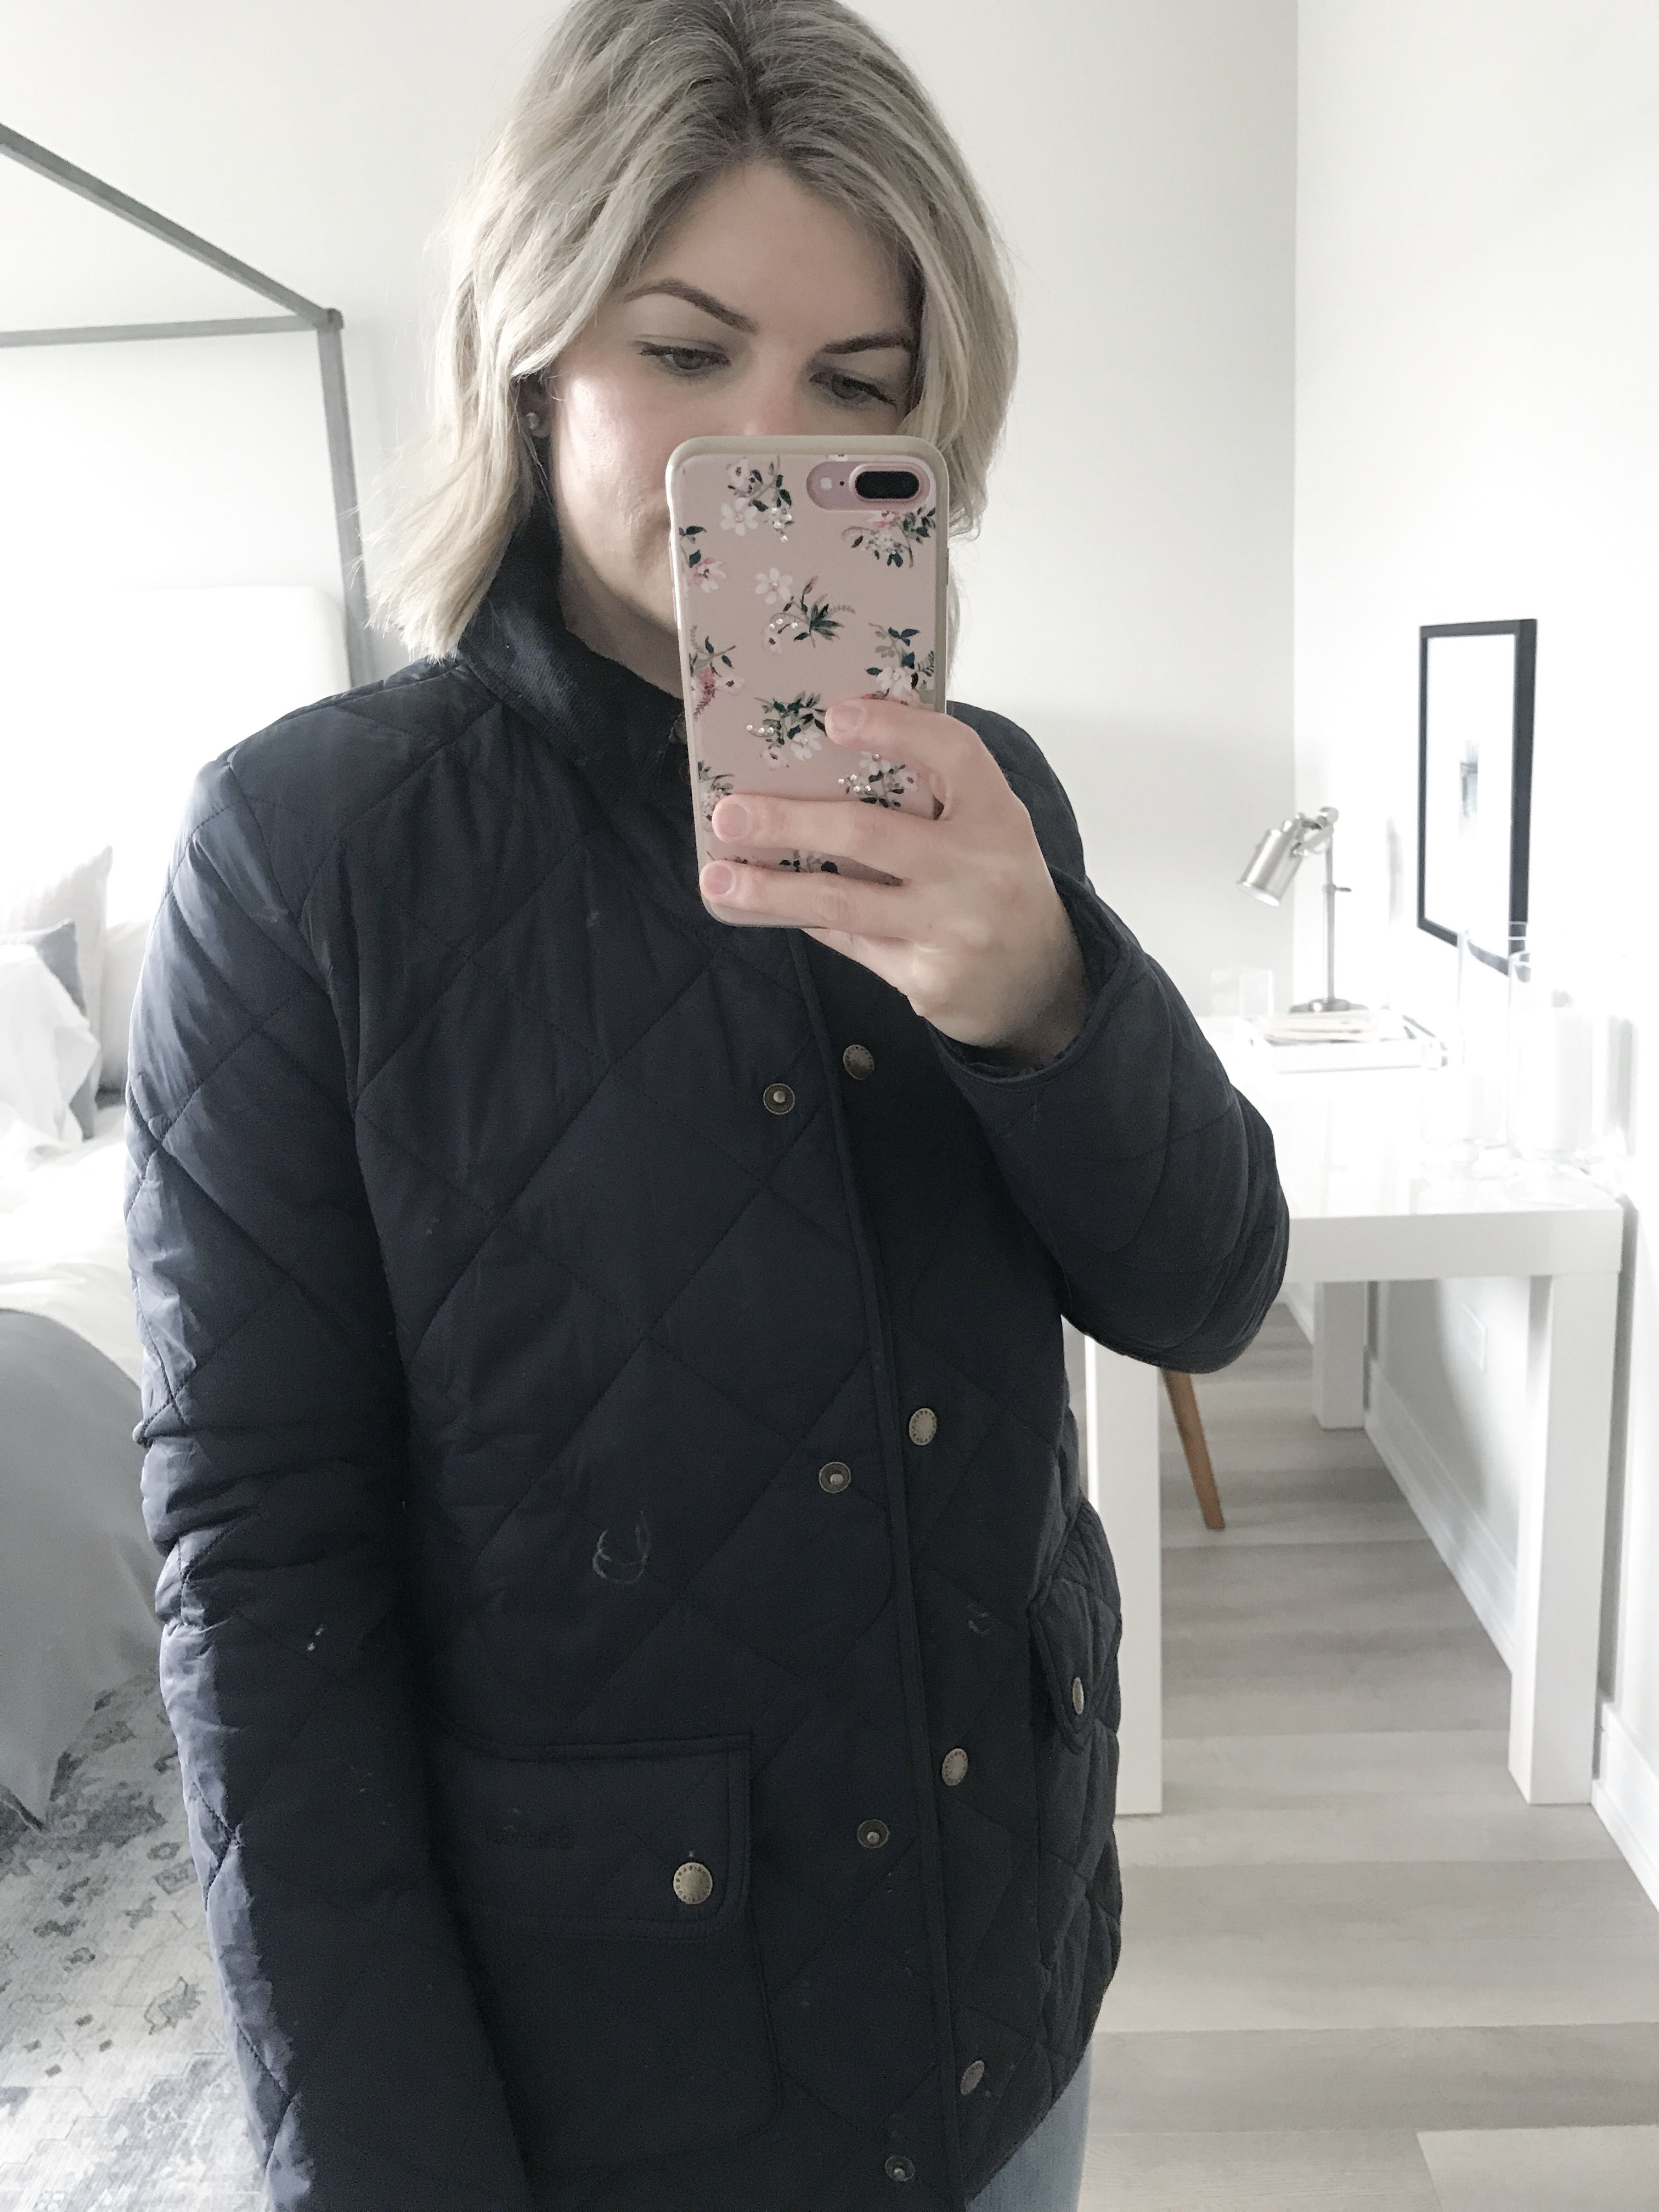 Barbour jacket from the Nordstrom sale